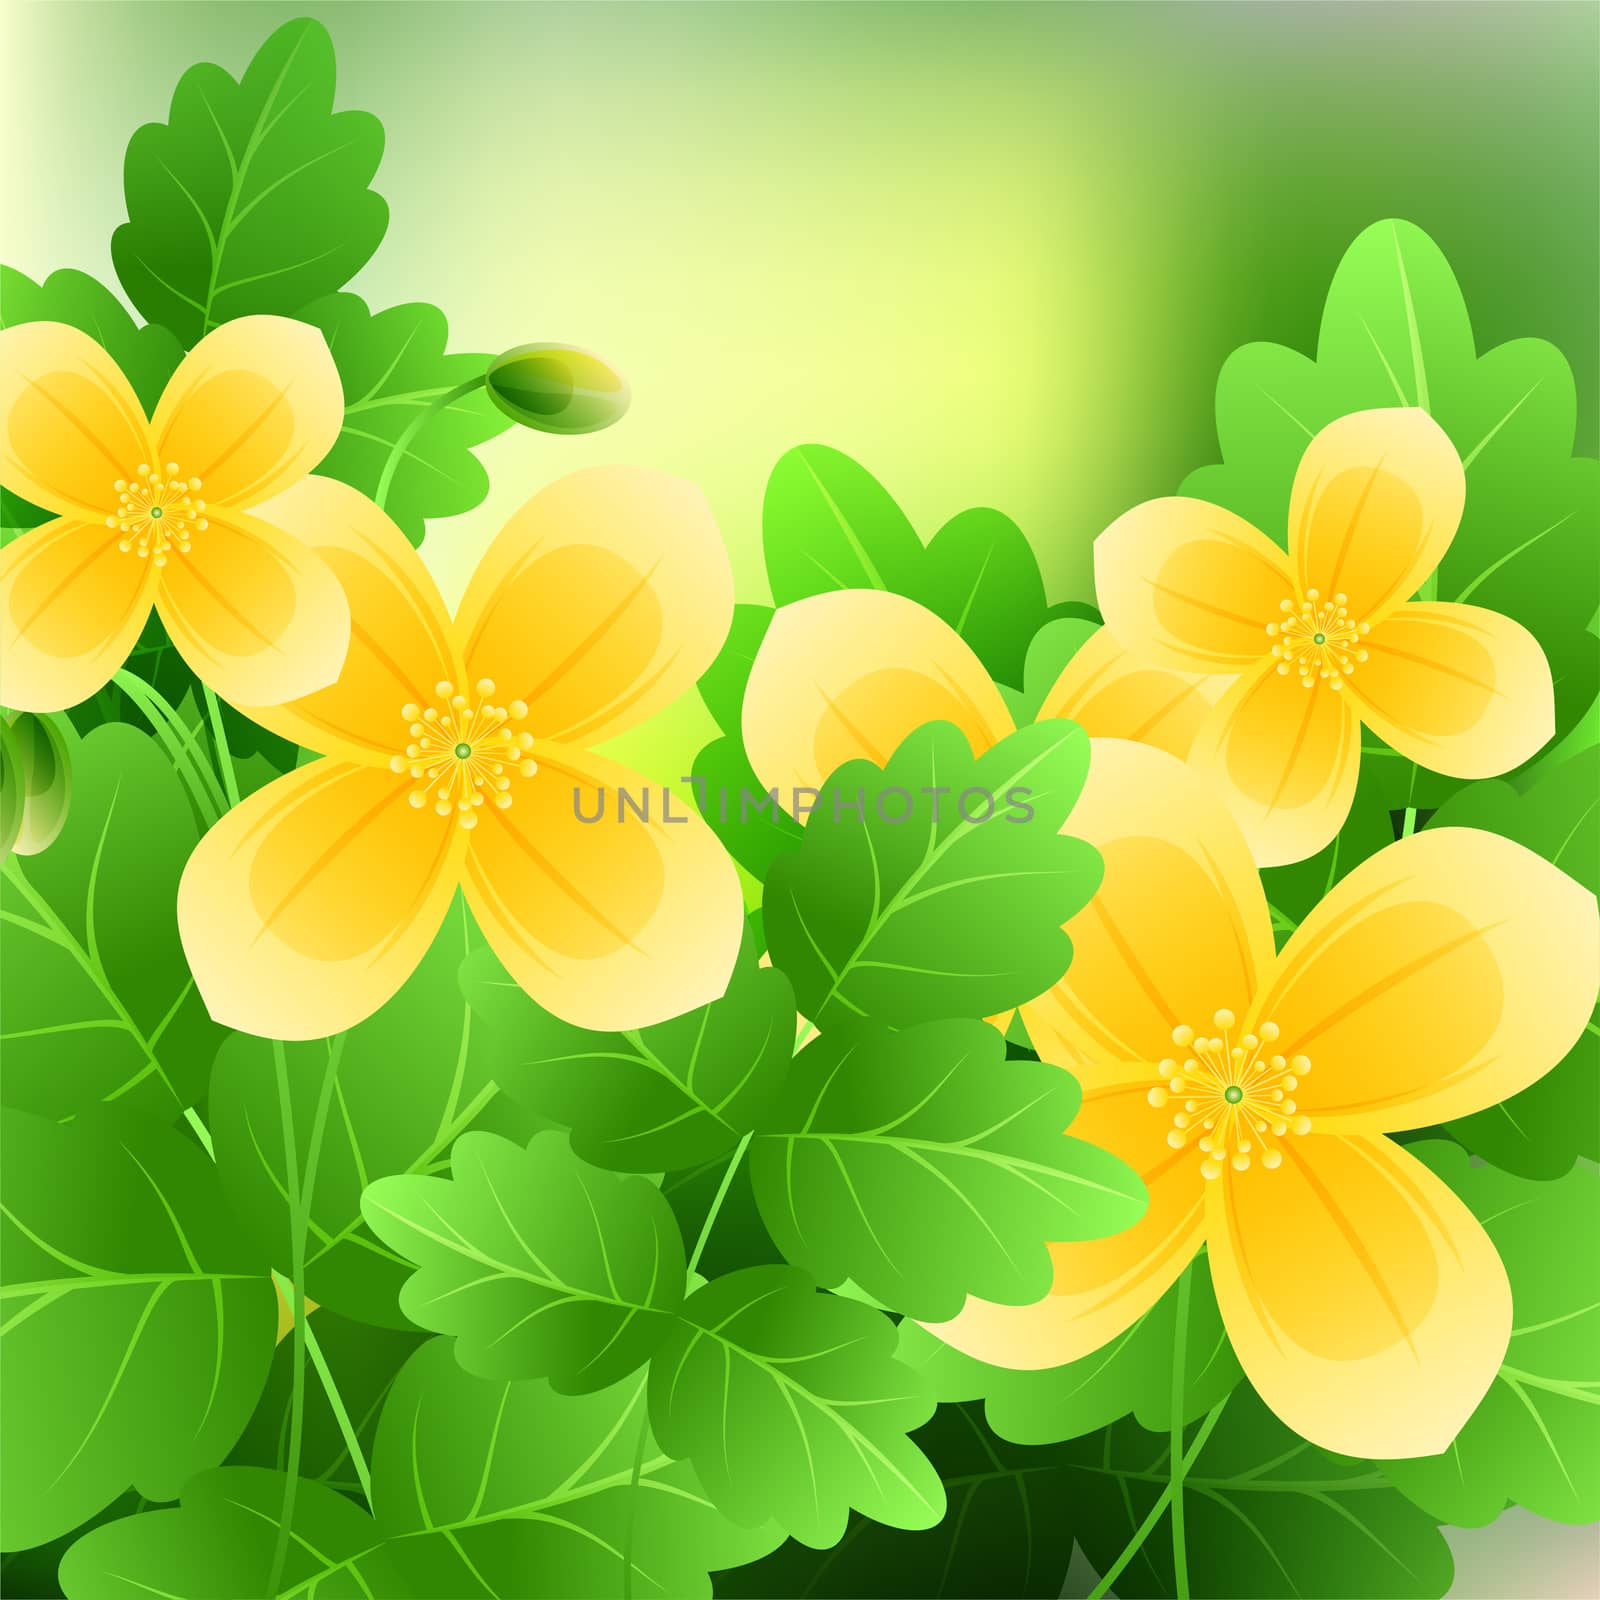 Beautiful spring flowers Celandine. Cards or your design with space for text. illustration